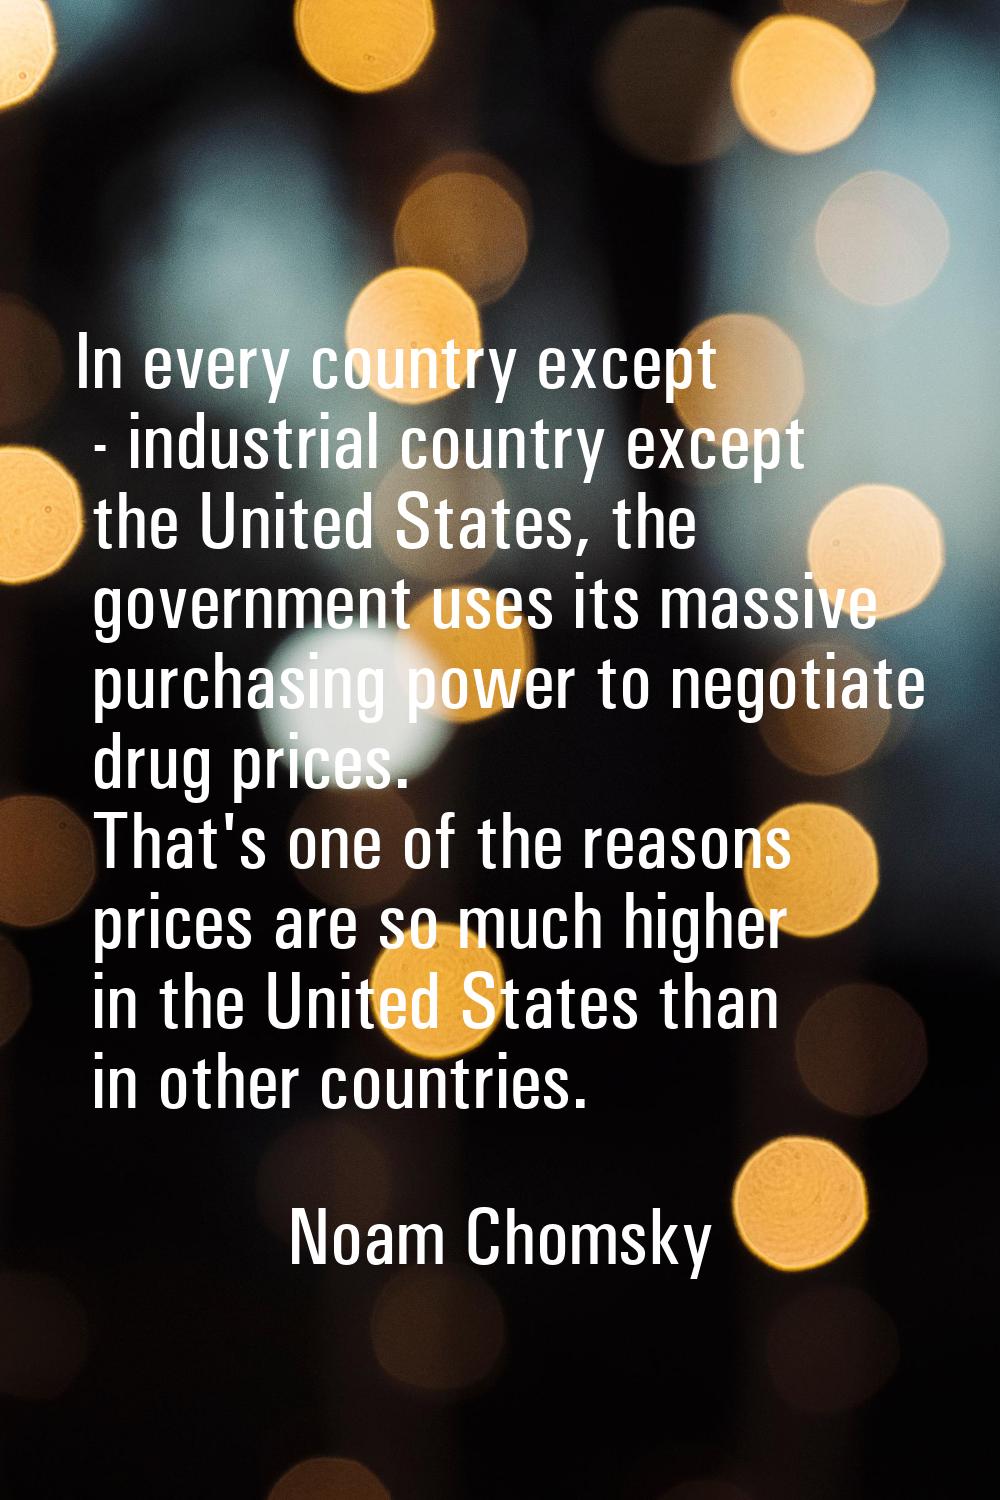 In every country except - industrial country except the United States, the government uses its mass